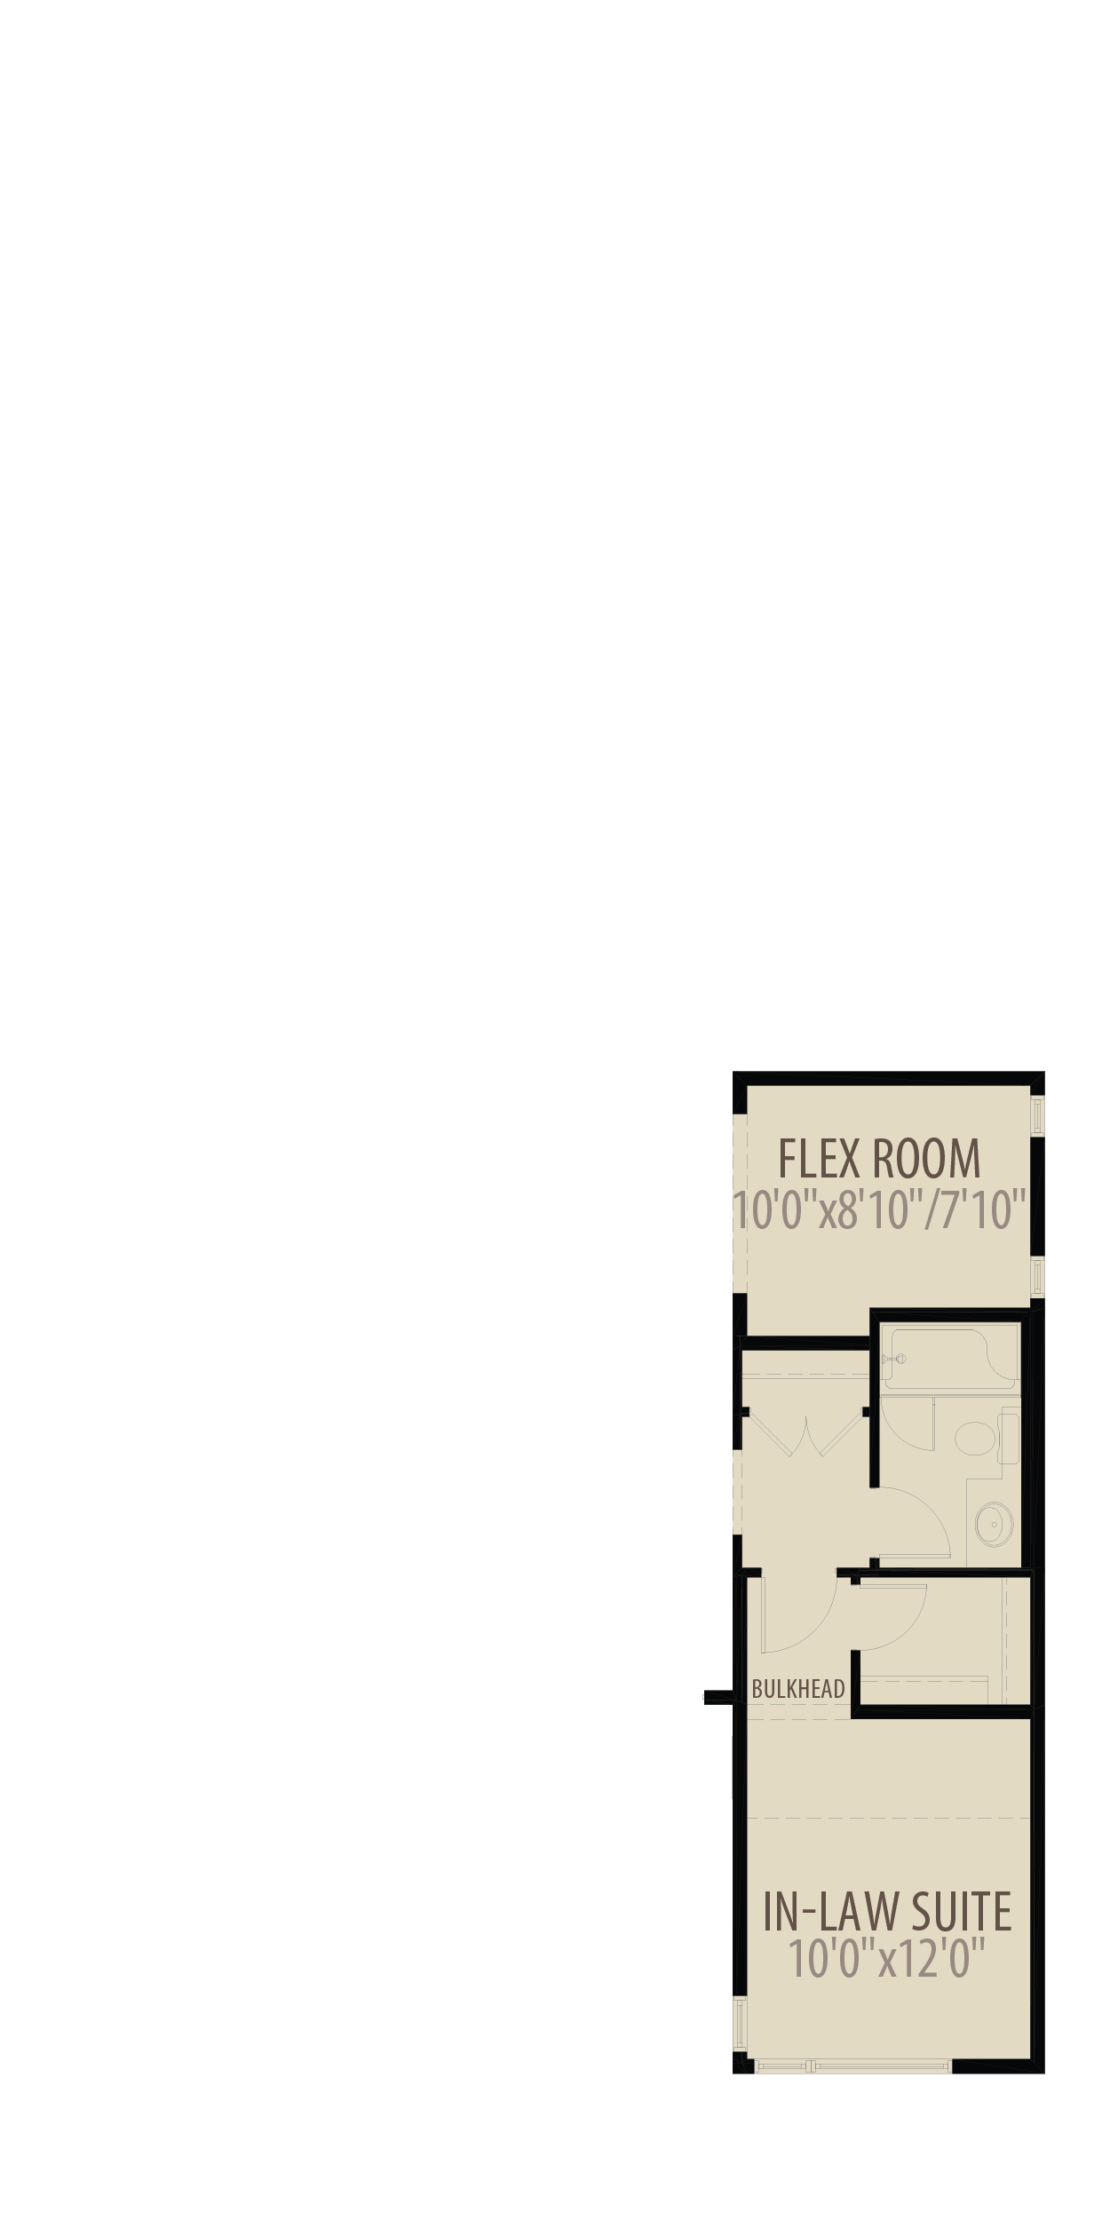 In Law Suite adds 220 sq ft